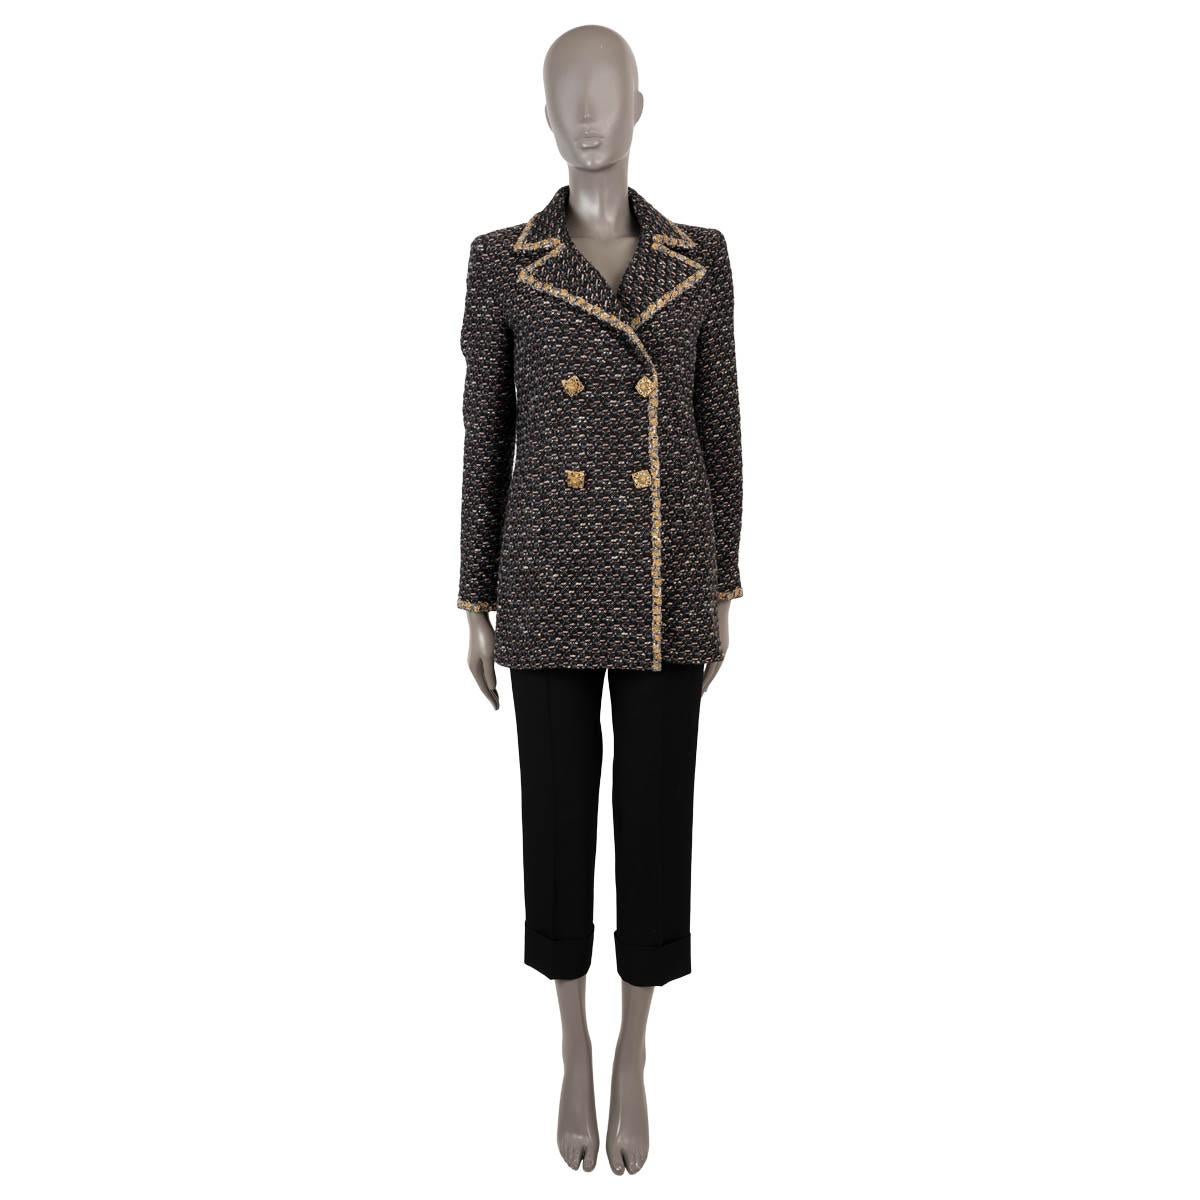 CHANEL black & grey wool 2011 11A BYCANCE TWEED Peacoat Jacket 38 S For Sale 1